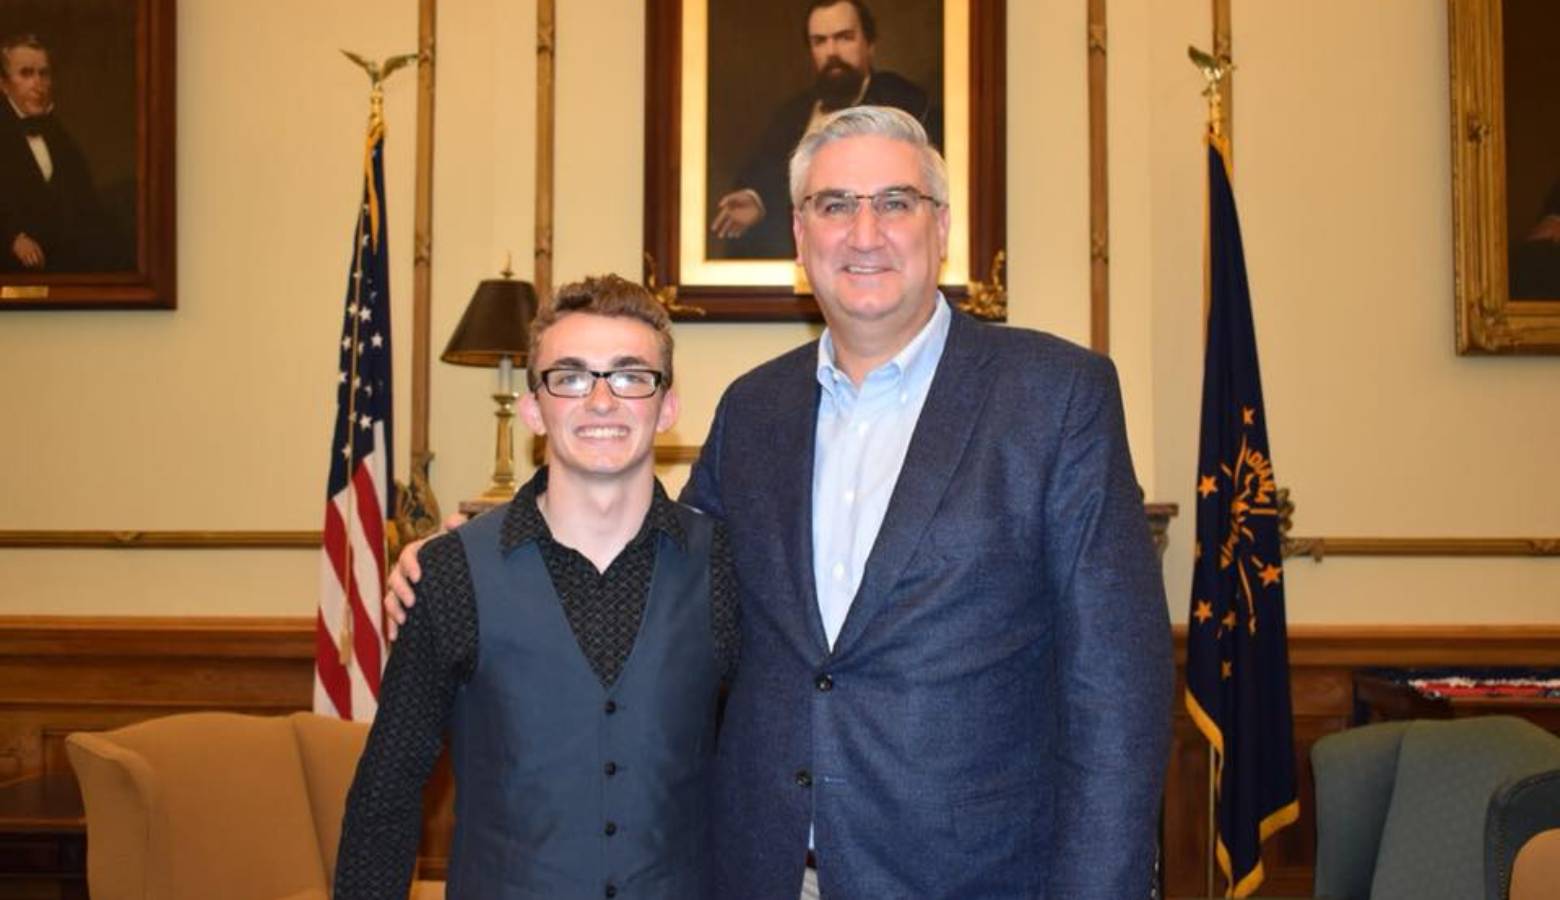 Joshua Christian and Gov. Eric Holcomb. (Photo provided by Connected by 25)